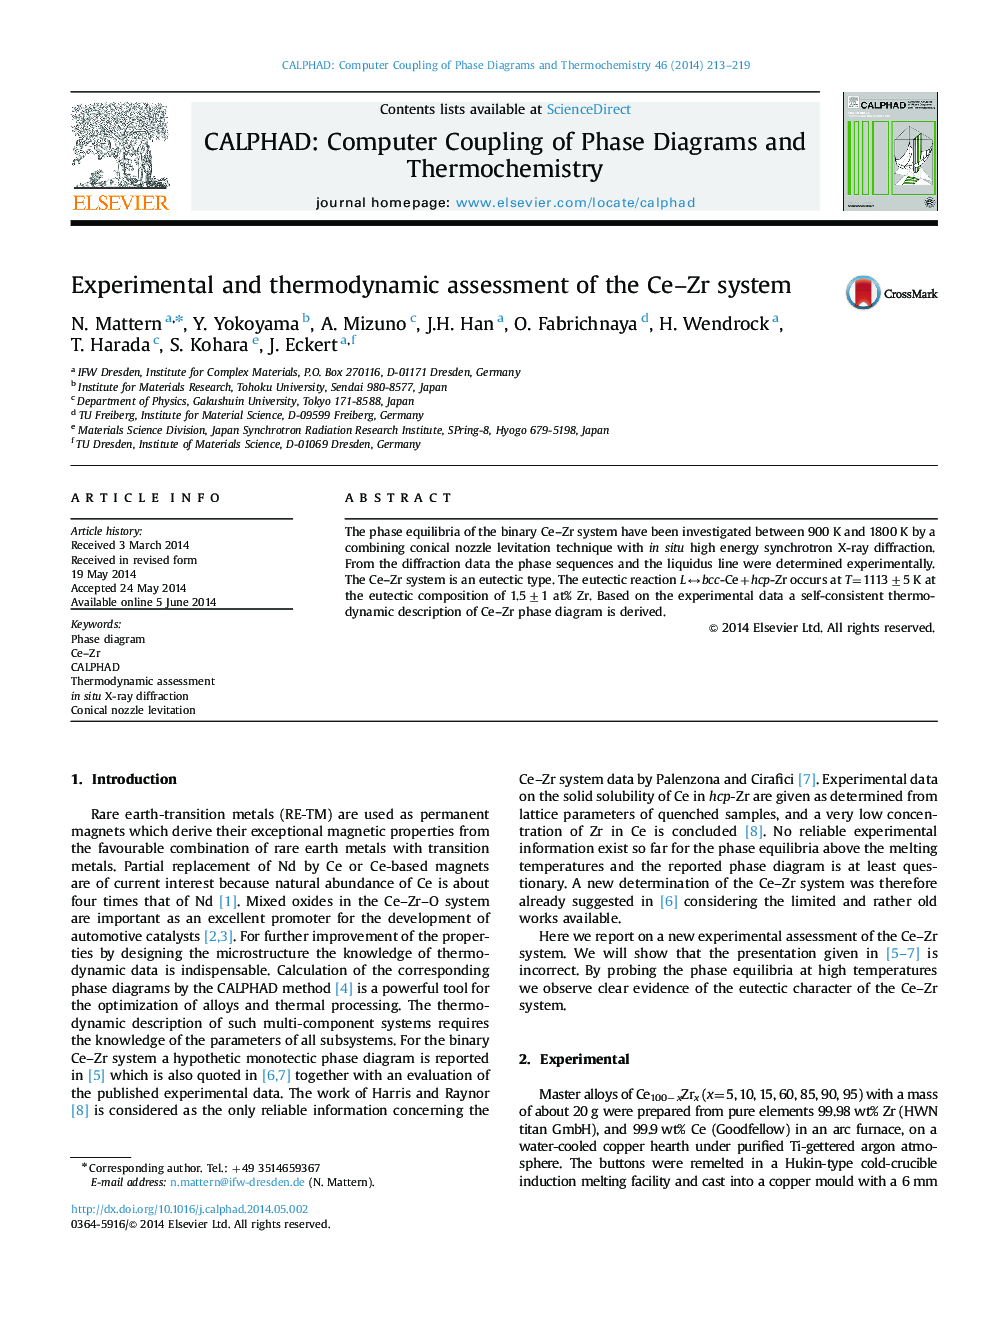 Experimental and thermodynamic assessment of the Ce–Zr system